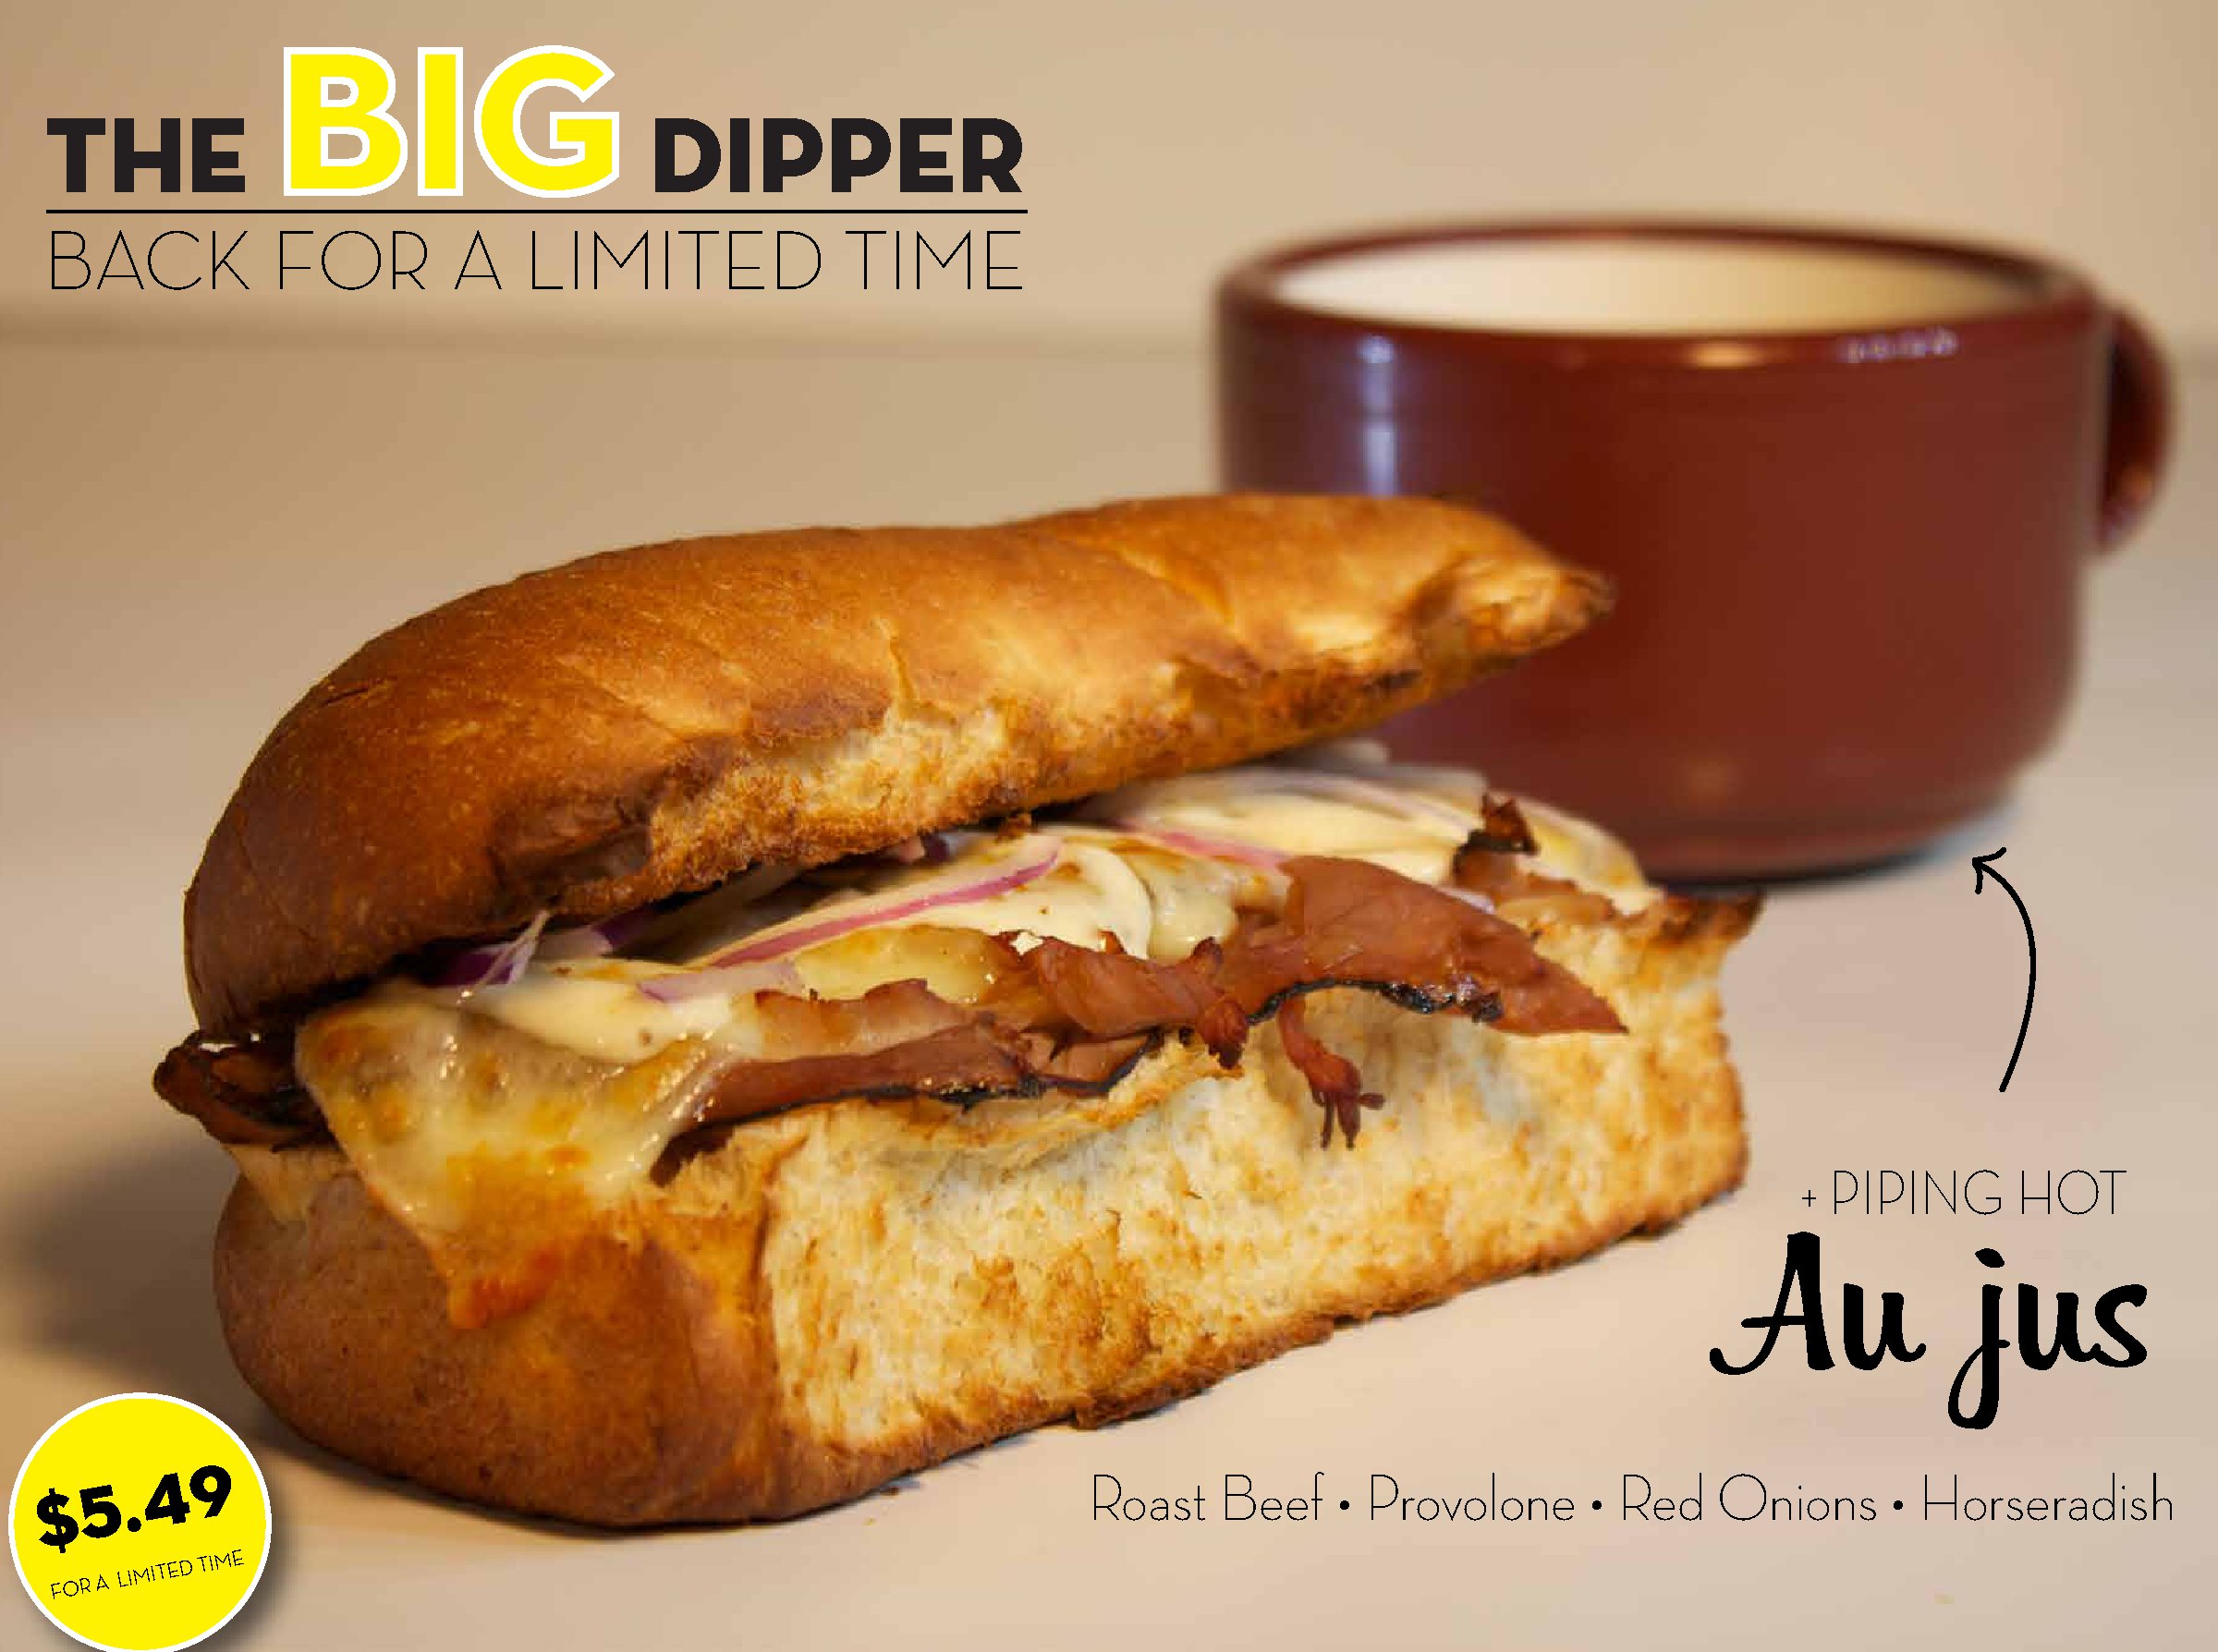 The Big Dipper is back for a limited time only